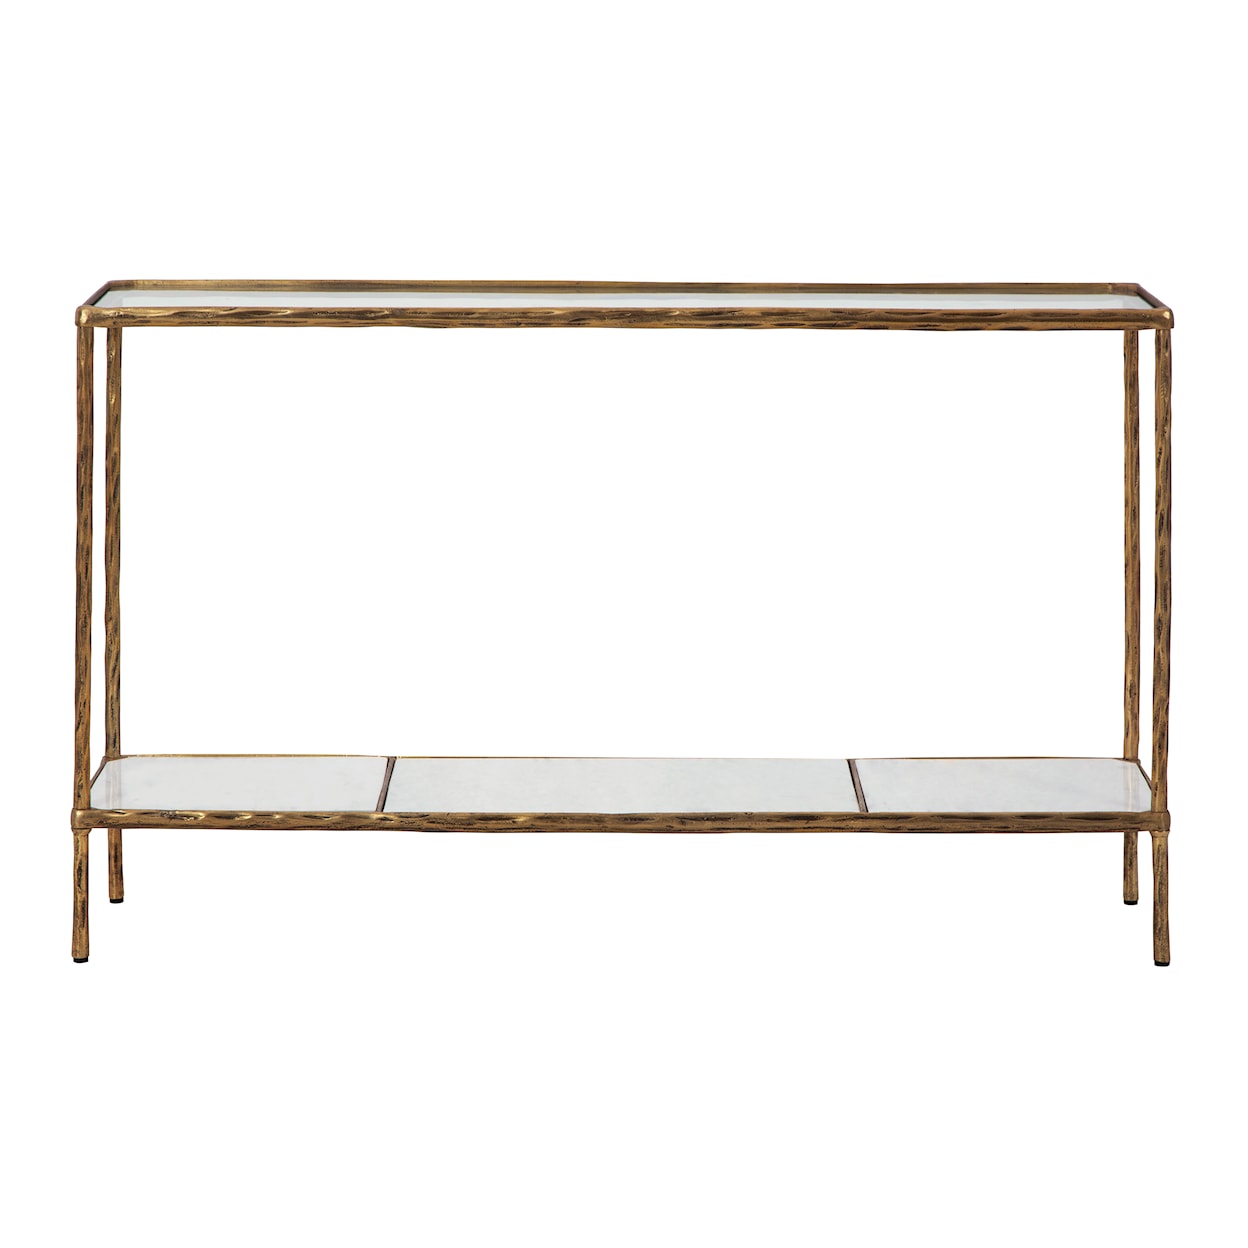 Signature Design by Ashley Antique Brass Console Table